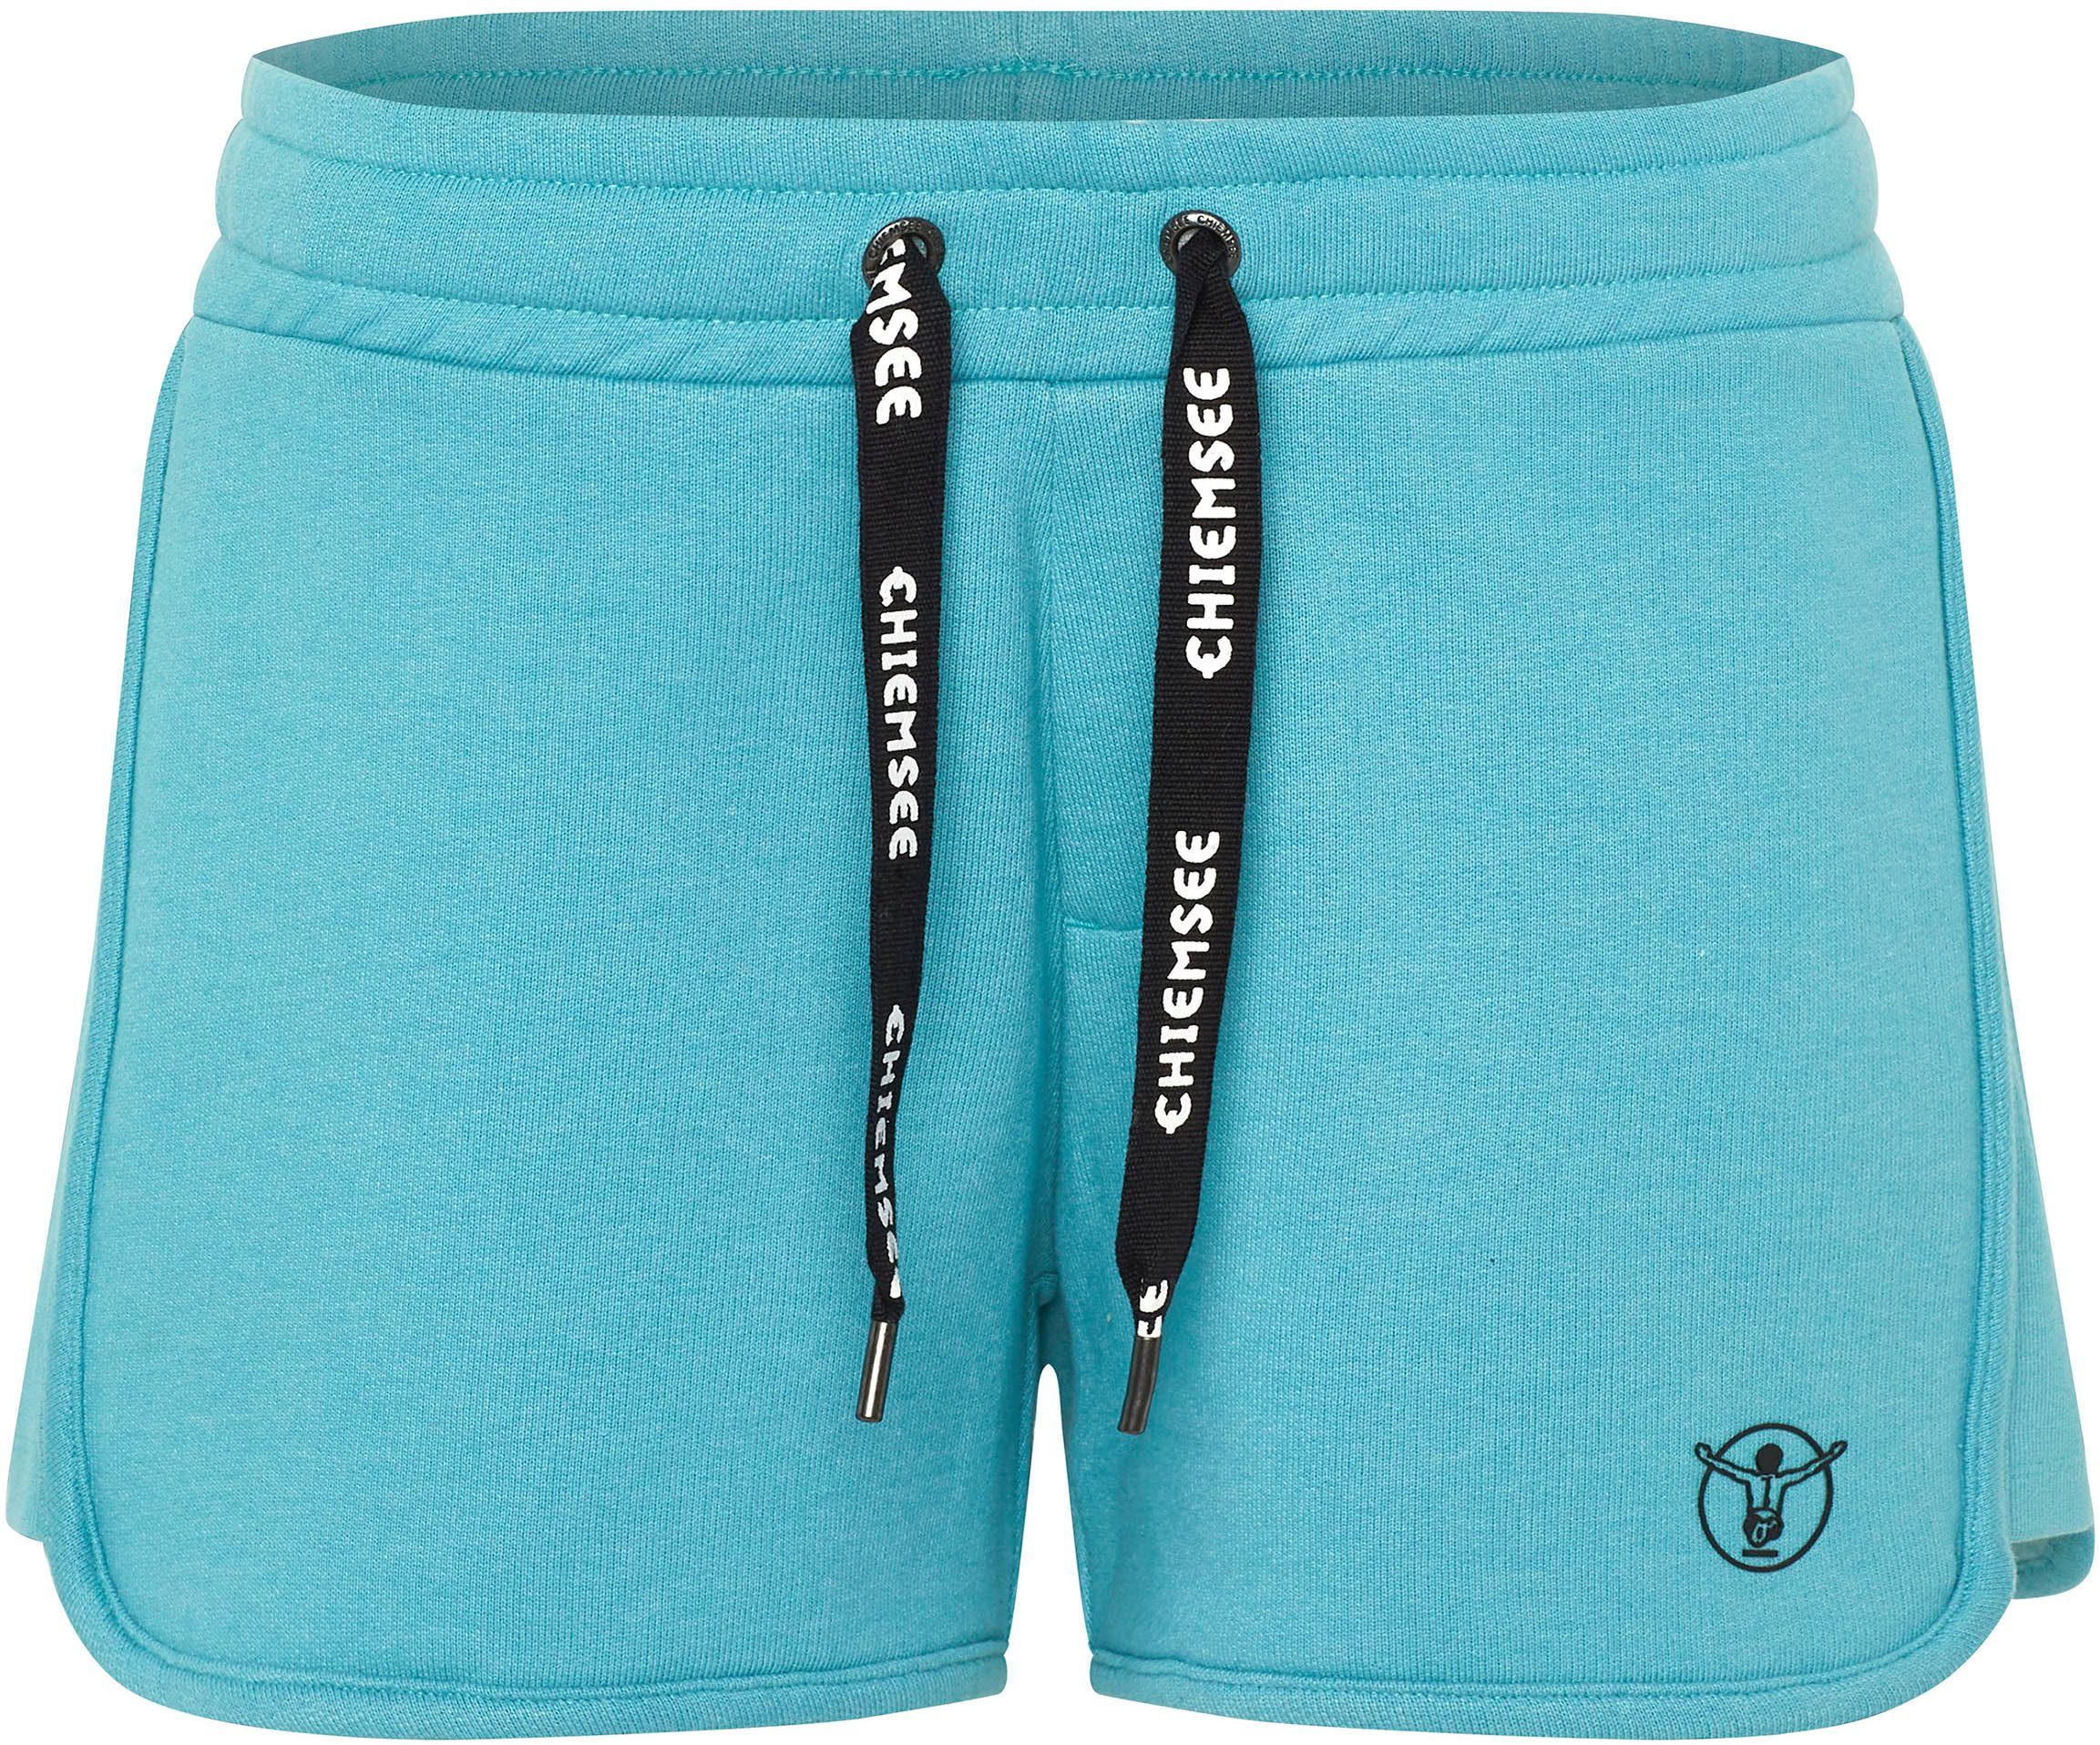 Chiemsee delphinblue Shorts